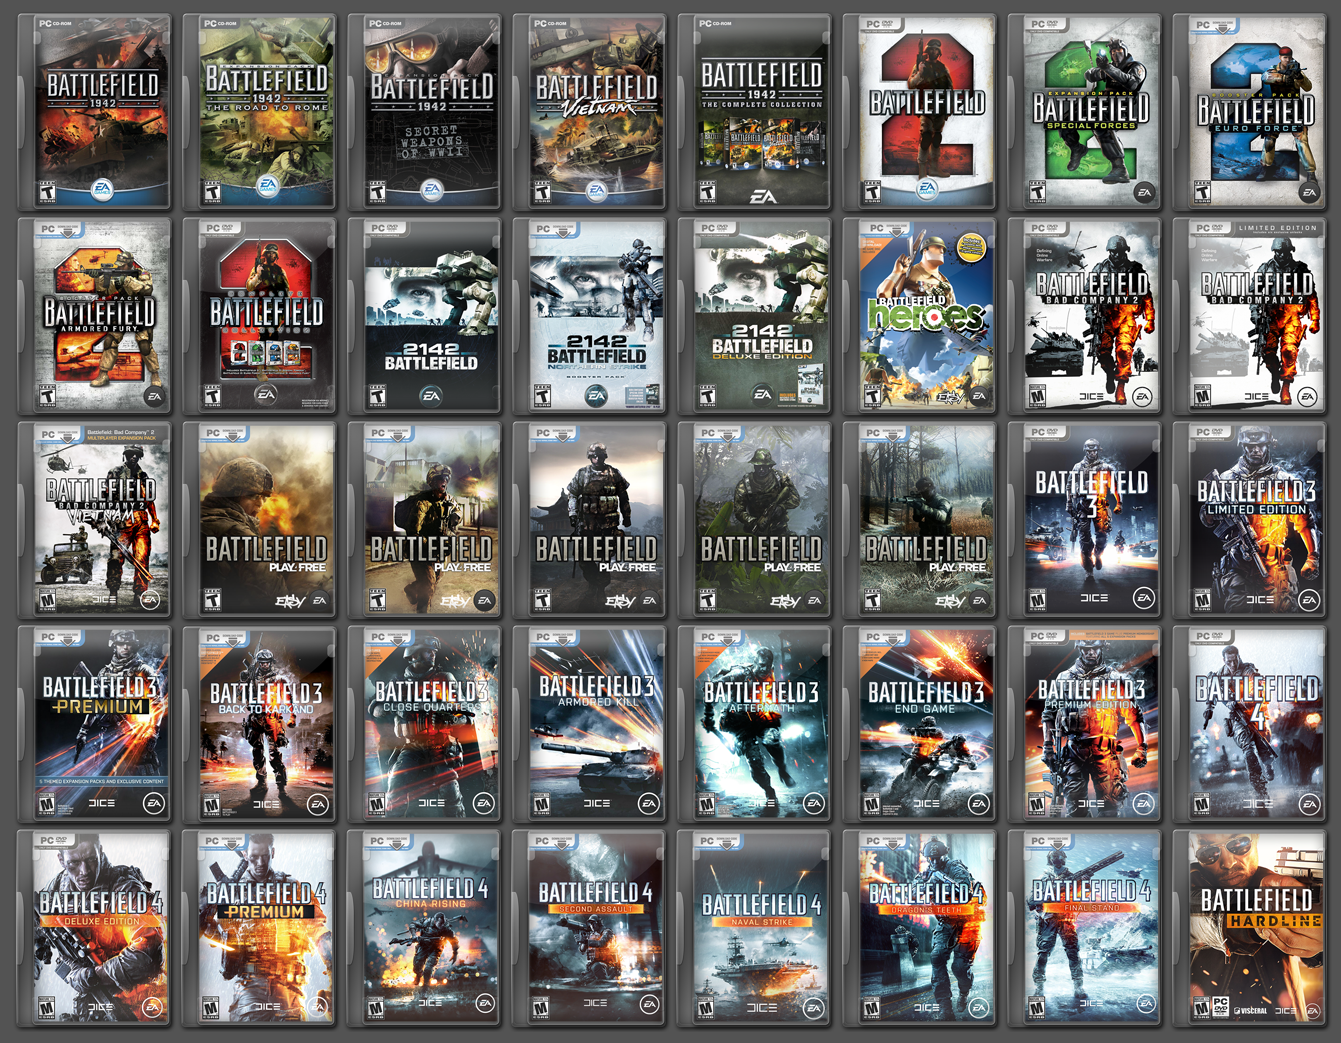  If you open your Origin library, most expansions and premium editions are listed separately. Battlefield 1 doesn't even fit in the first 40 icons. 